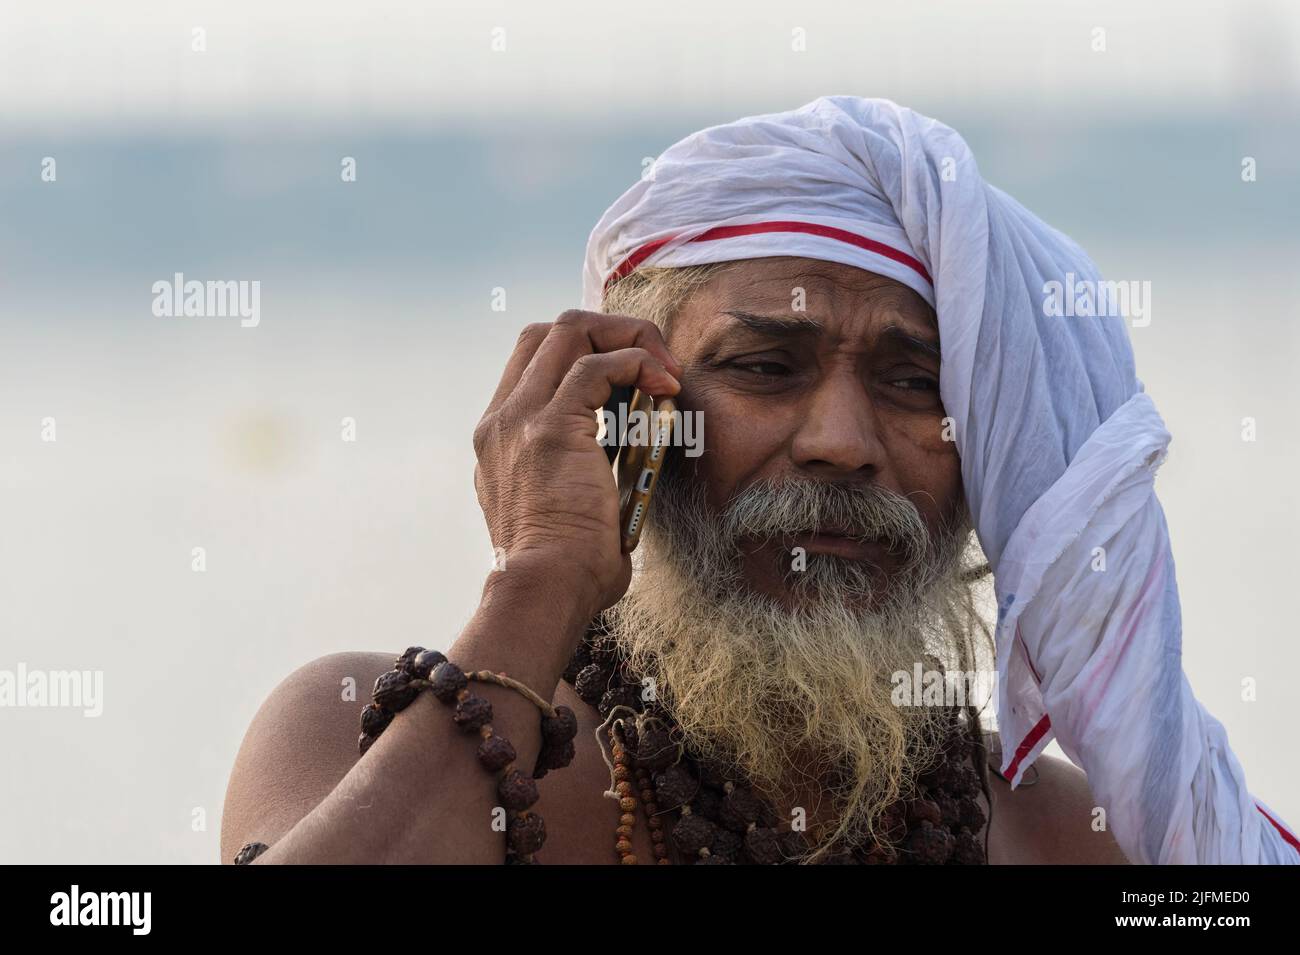 Rome Baba phoning with a cellular on Ganges riverbank, For Editorial Use Only, Allahabad Kumbh Mela, World’s largest religious gathering, Uttar Prades Stock Photo